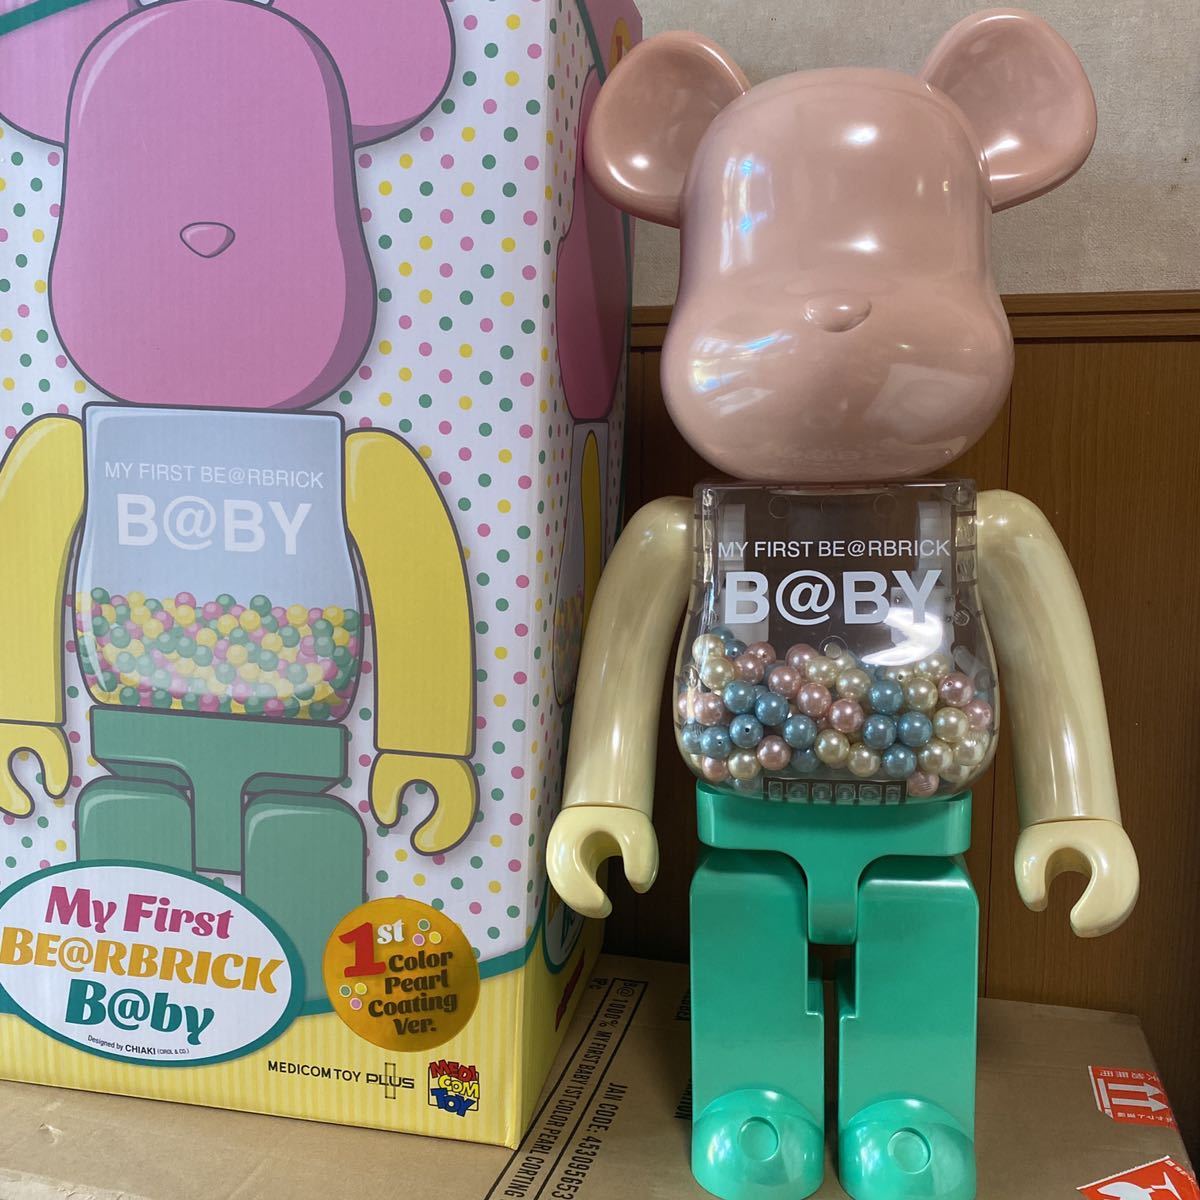 MY FIRST BE@RBRICK B@BY SECRET Ver.400％ | myglobaltax.com